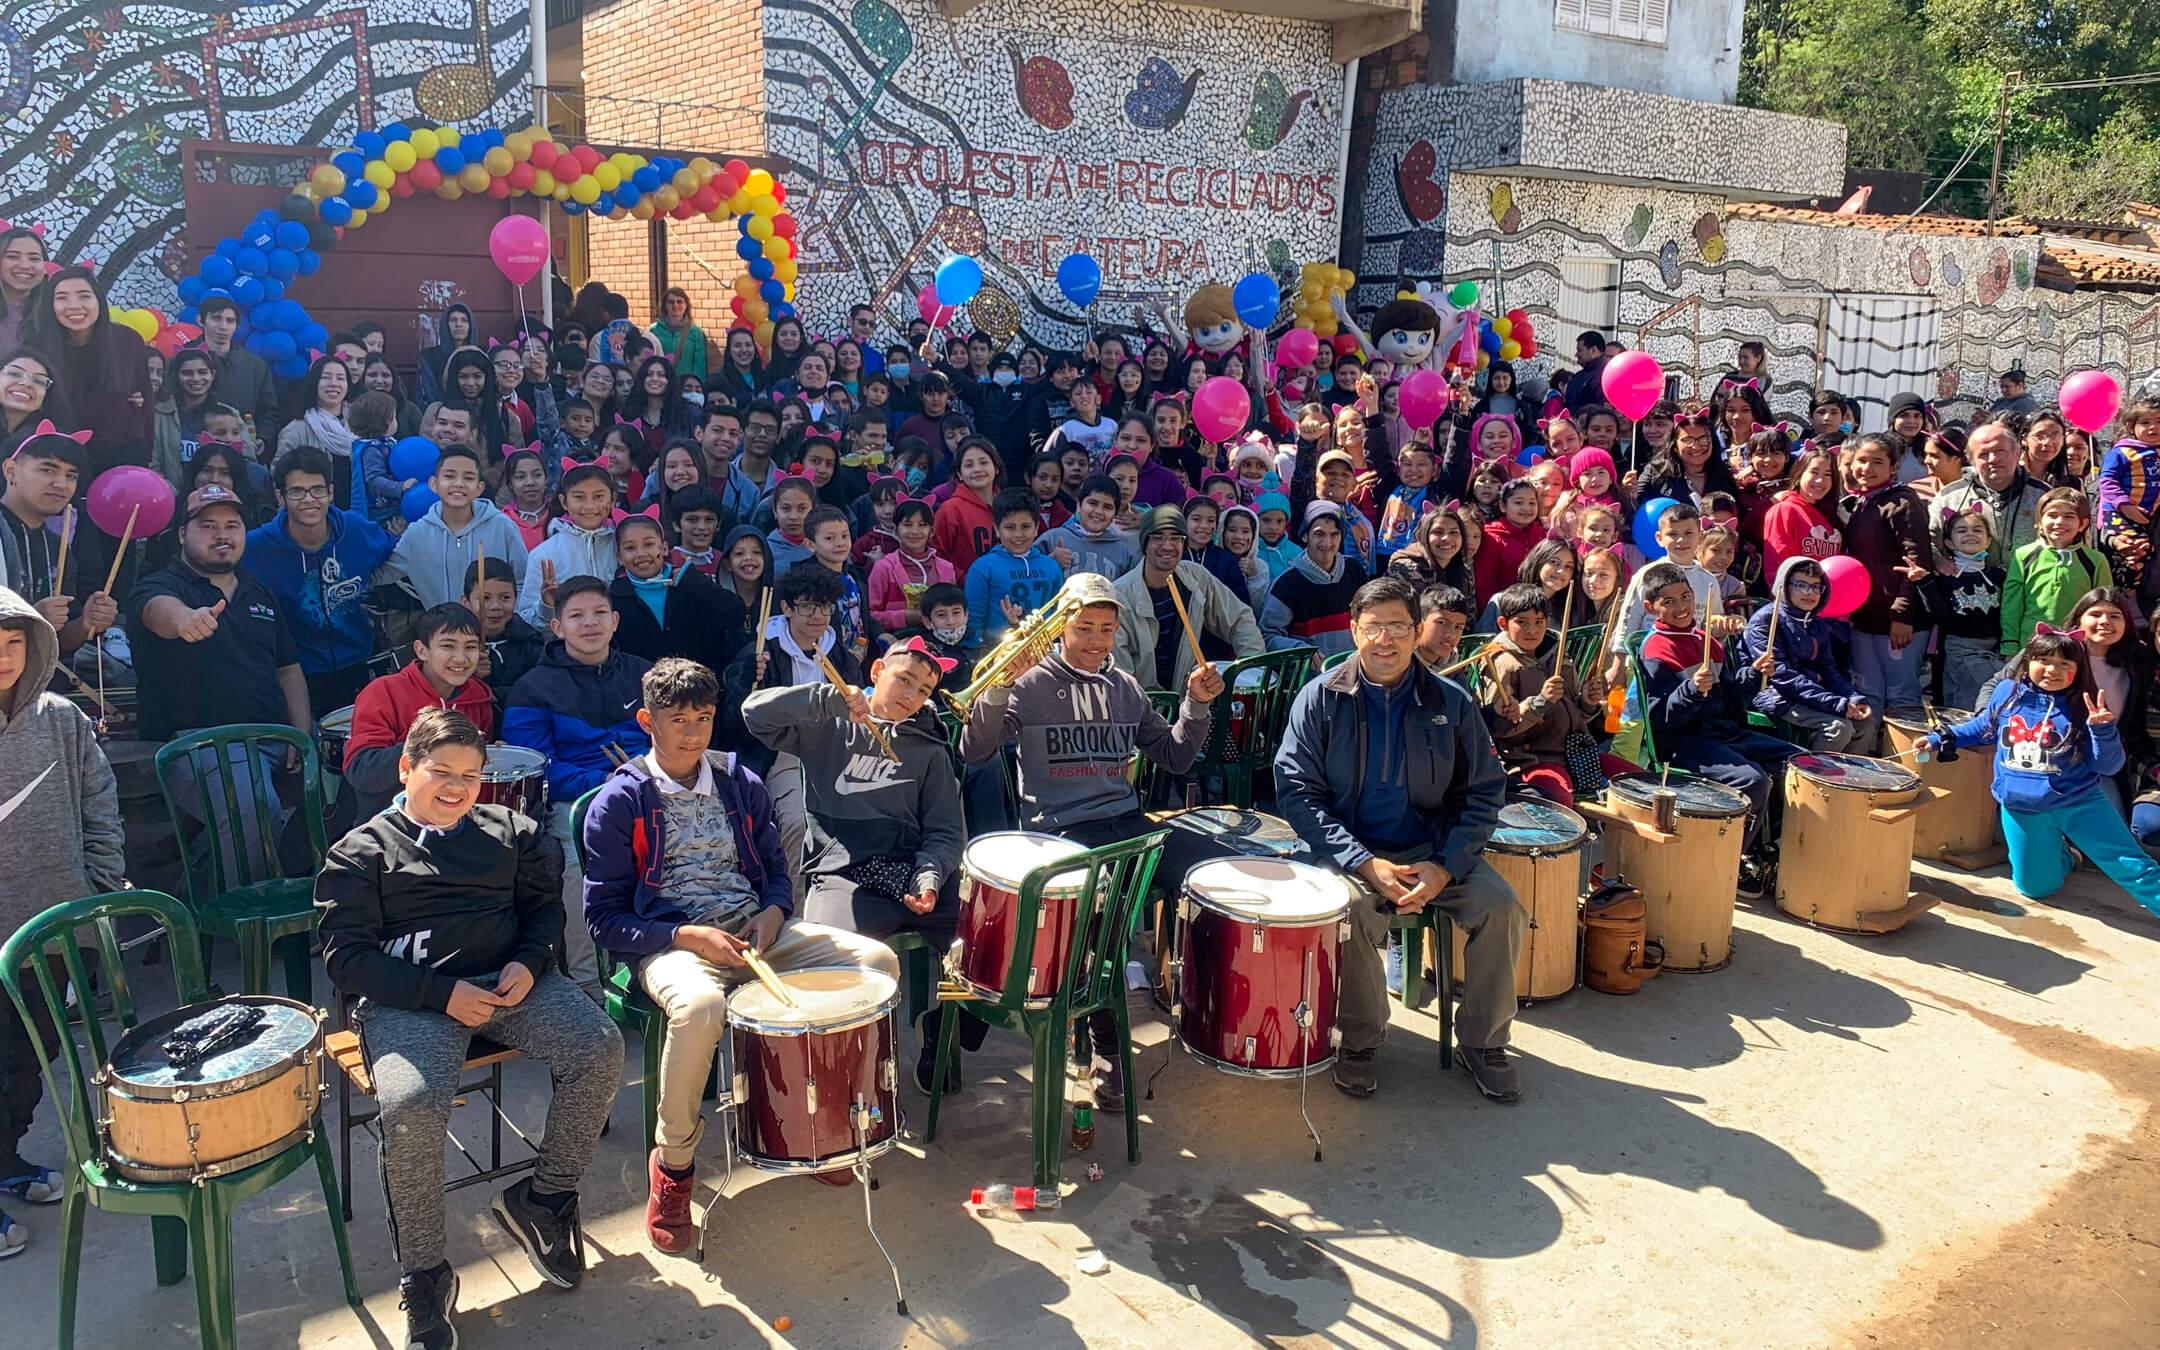 The Recycled Orchestra of Cateura has impacted the entire community, bringing hope and music to young people.
Photo: Recycled Orchestra of Cateura